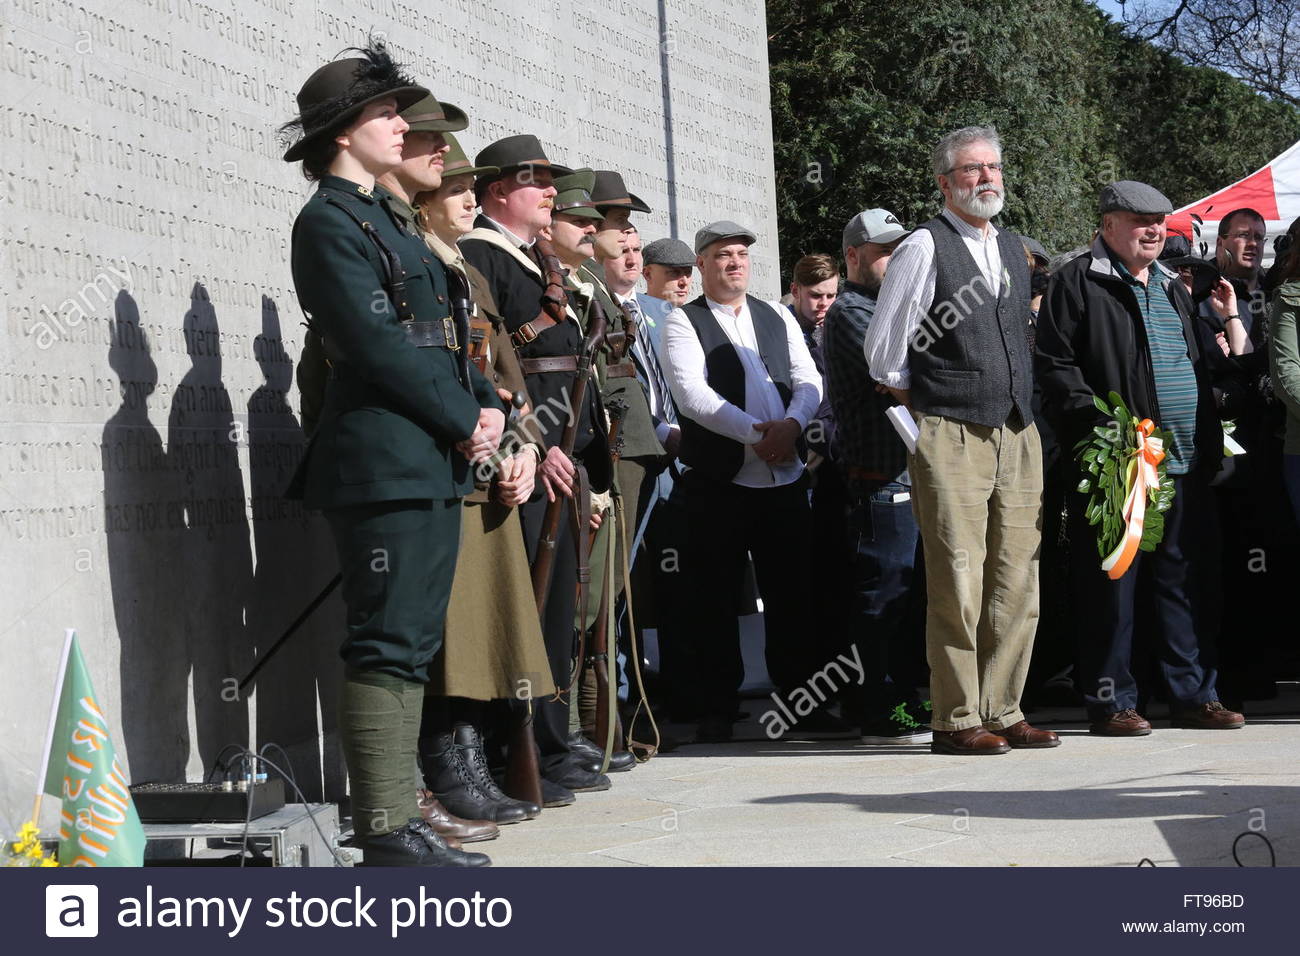 Dublin, Ireland. 25th March, 2016. Gerry Adams, President of Sinn fein, waits to deliver a speech in Dublin today as aprt of the 1916 centenary events. Credit:  reallifephotos/Alamy Live News Stock Photo